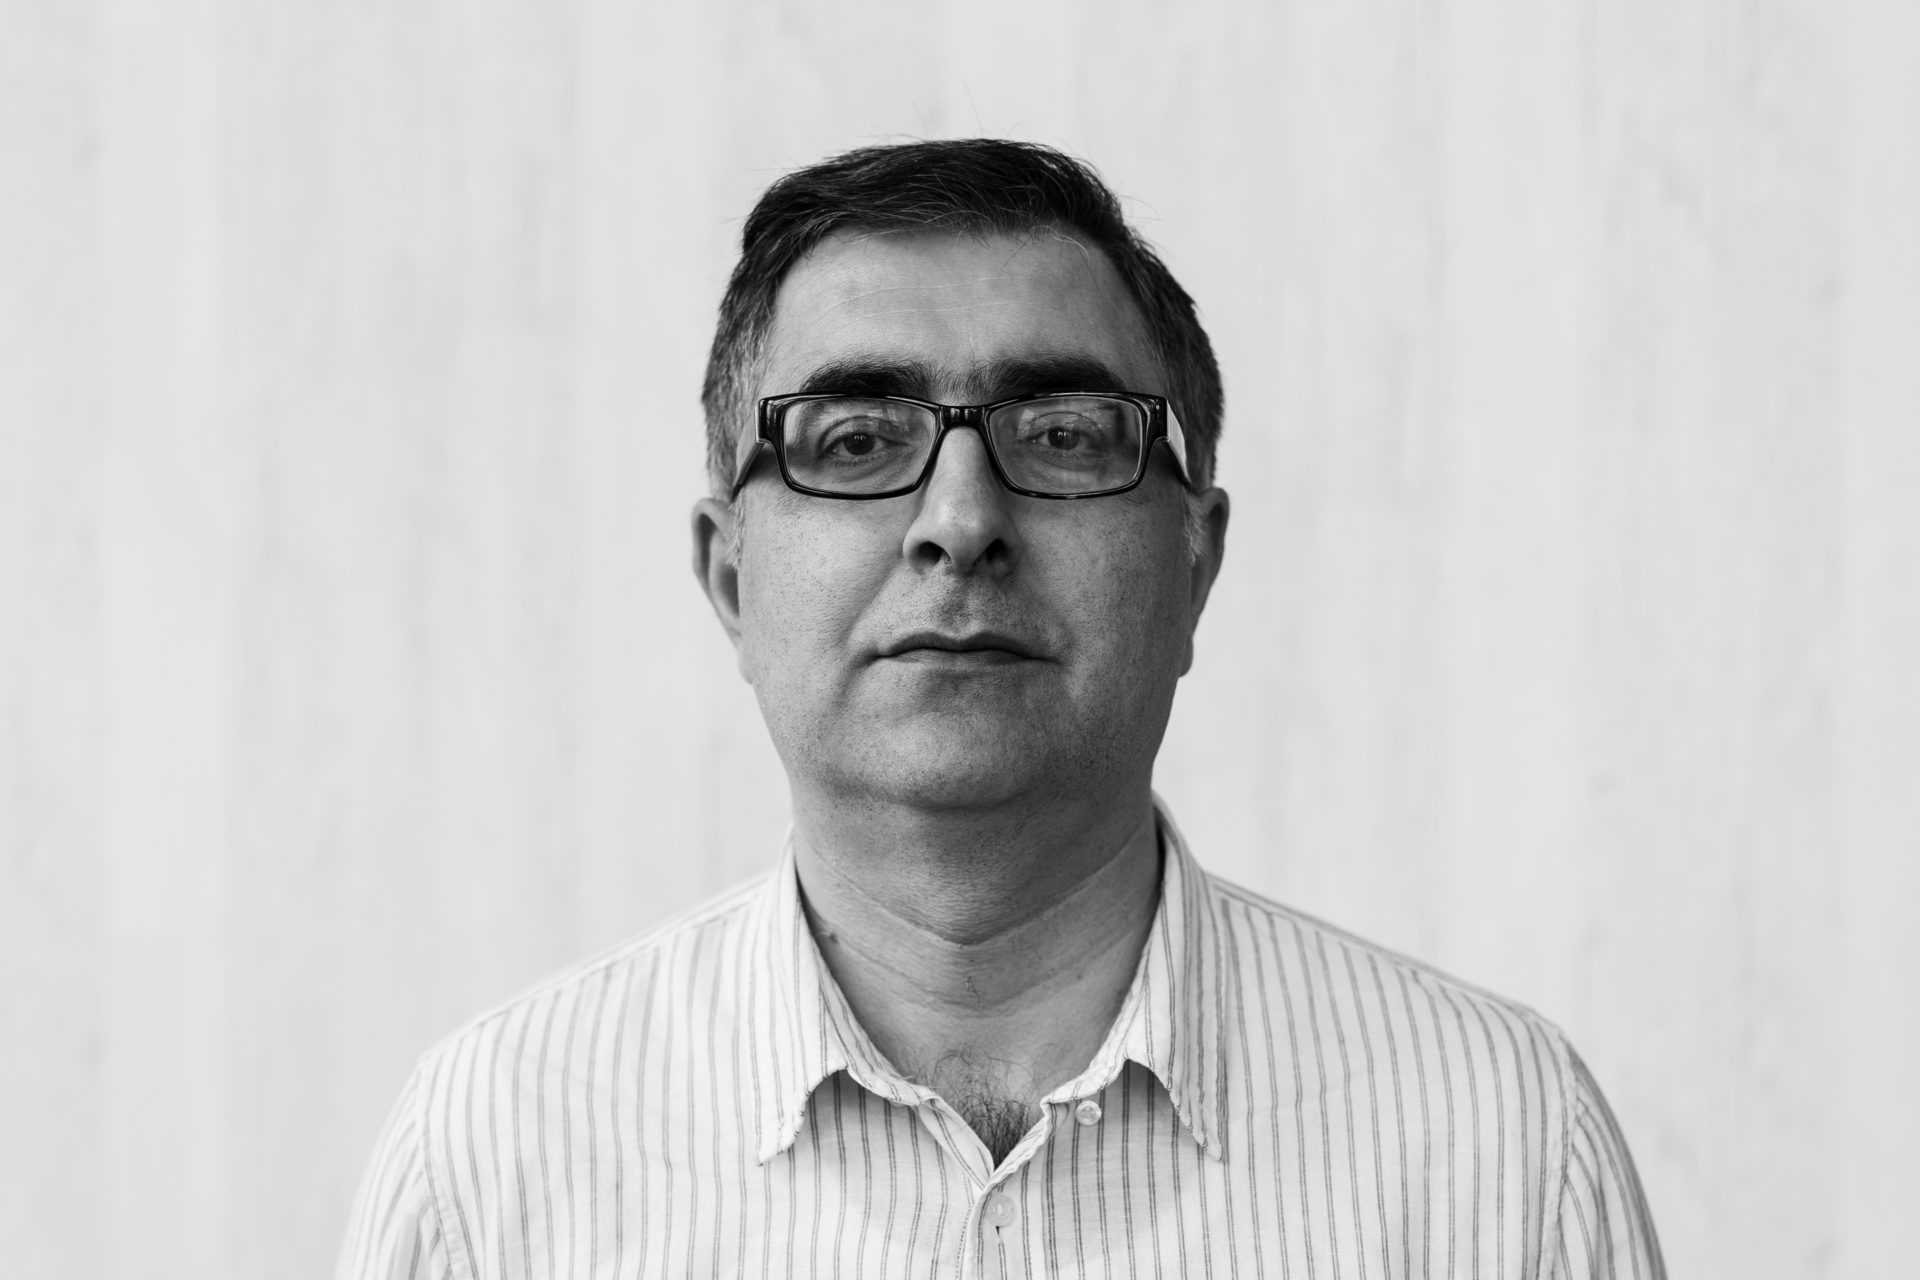 Human rights defender Anar Mammadli is the latest victim of Azerbaijan’s intensified crackdown against civil society: Mammadli should be released immediately